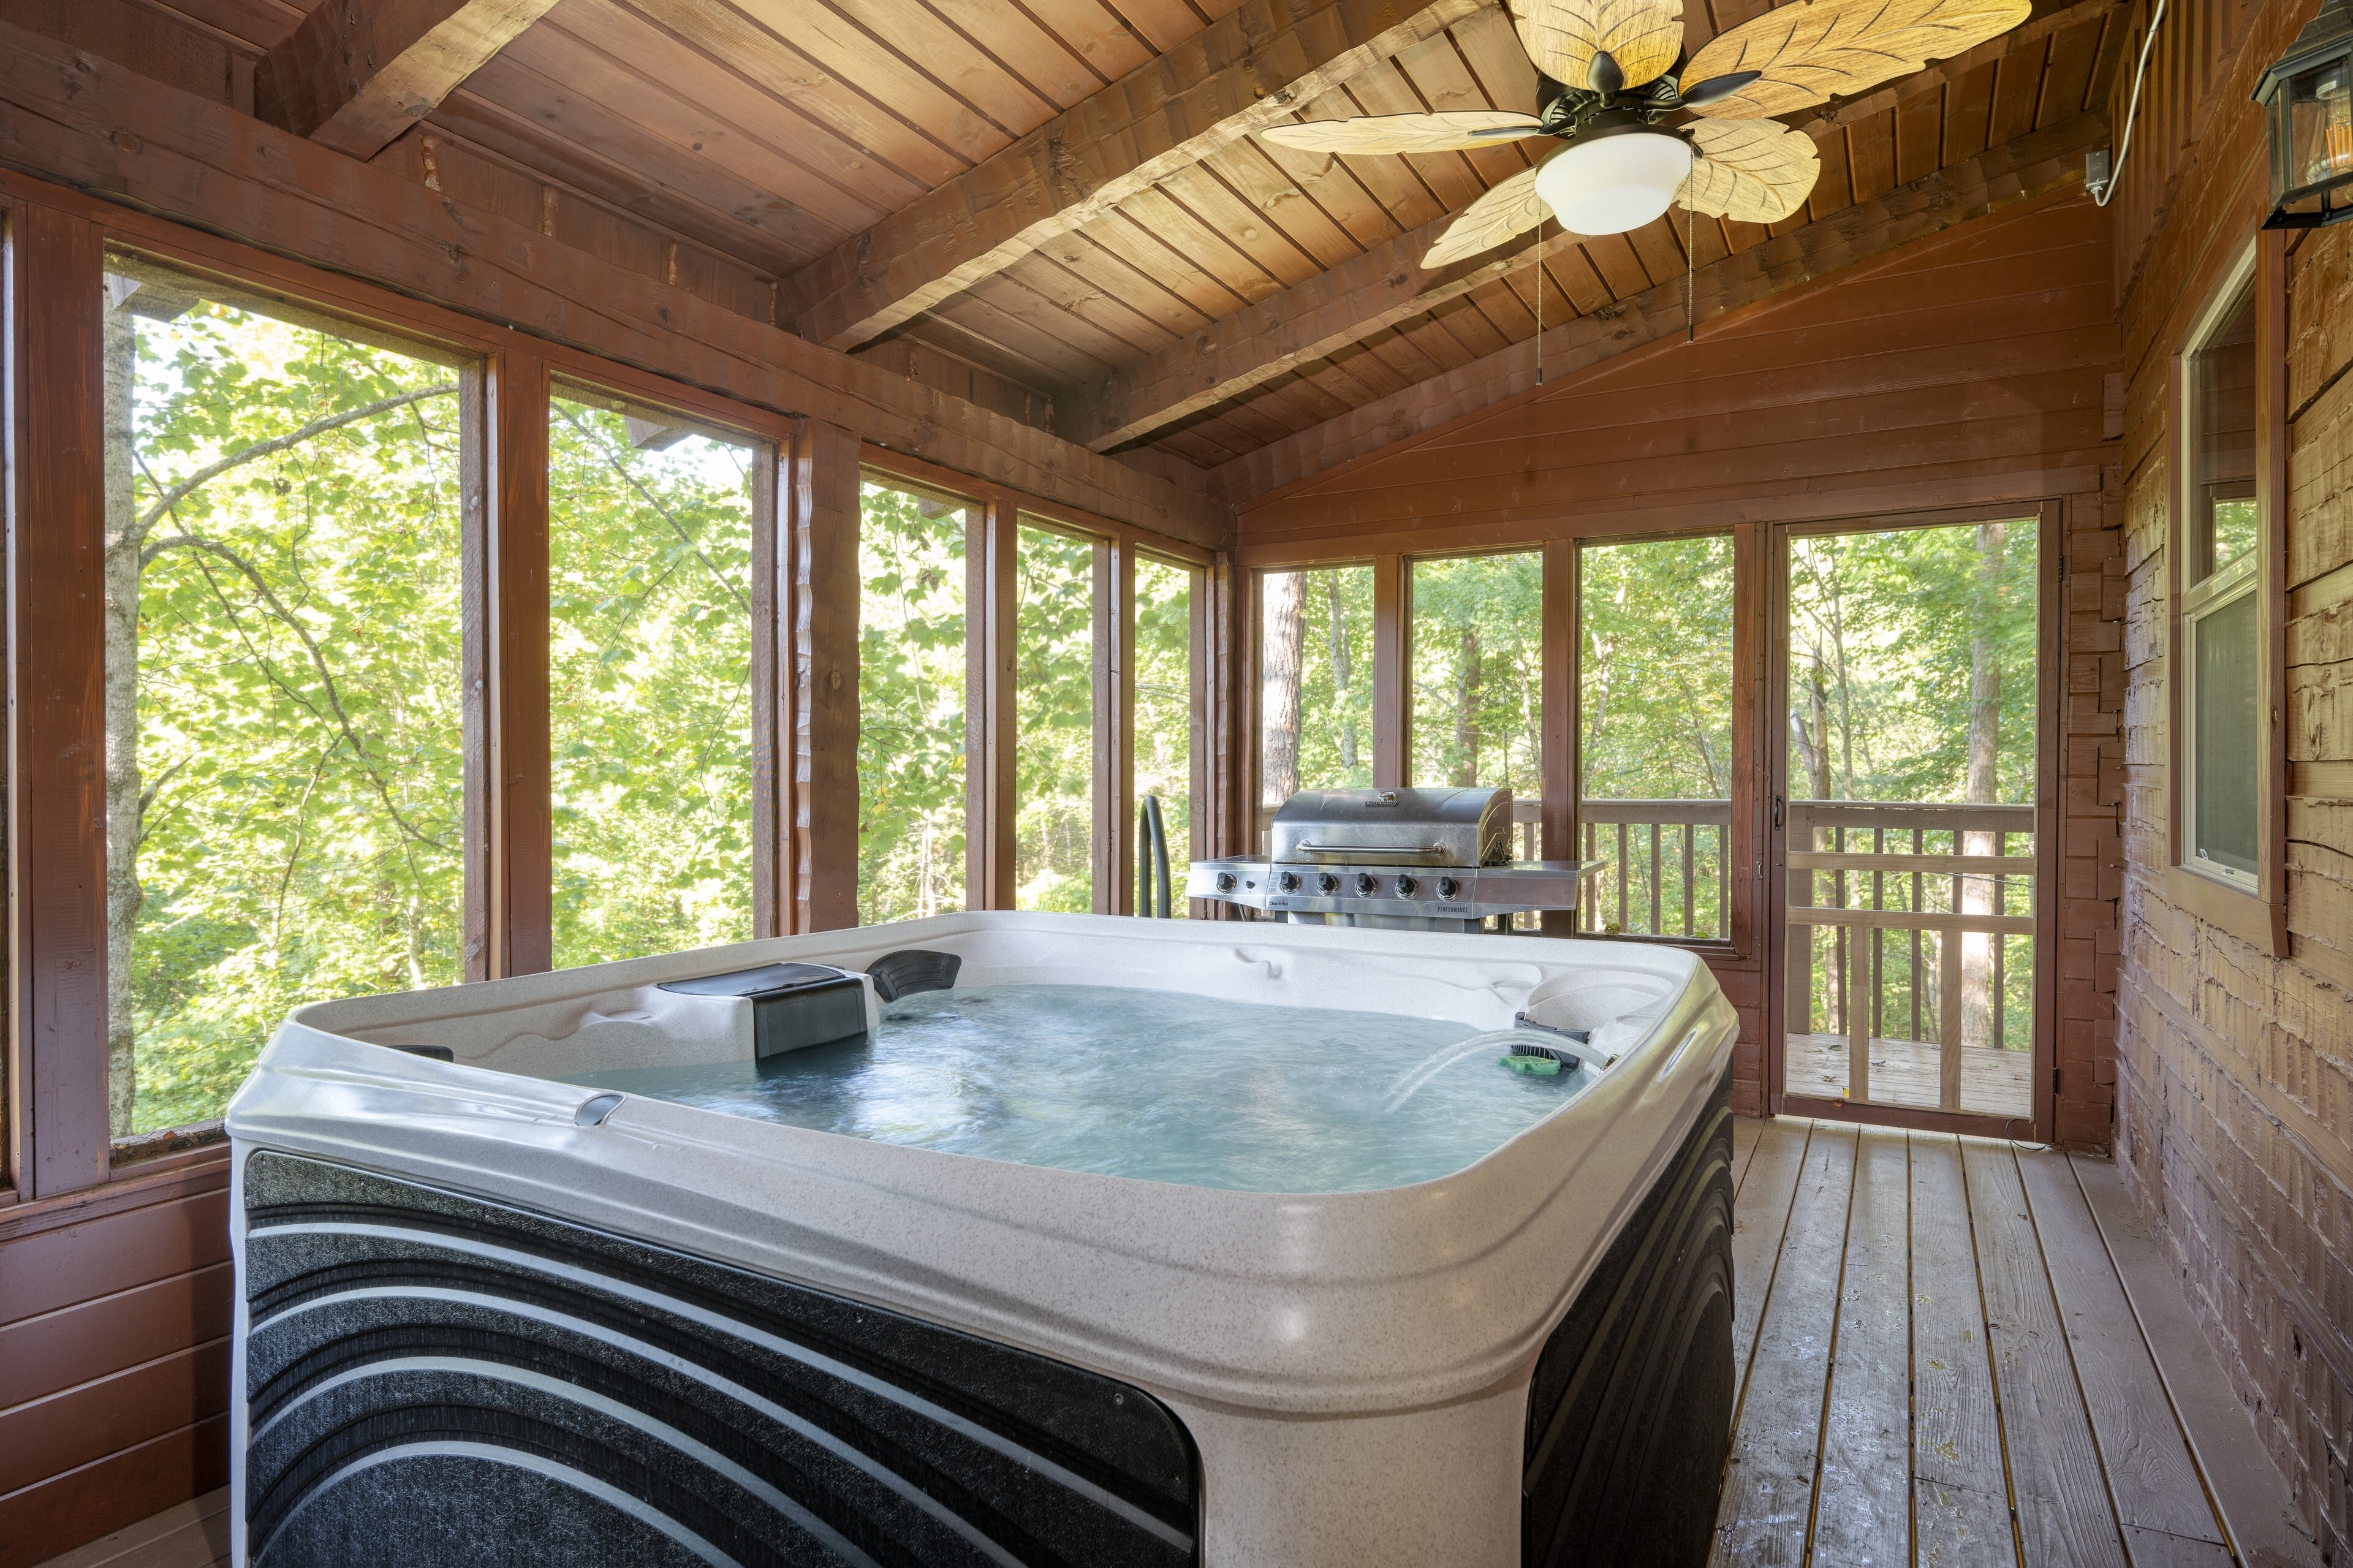 Luxurious hot tub on the enclosed patio.